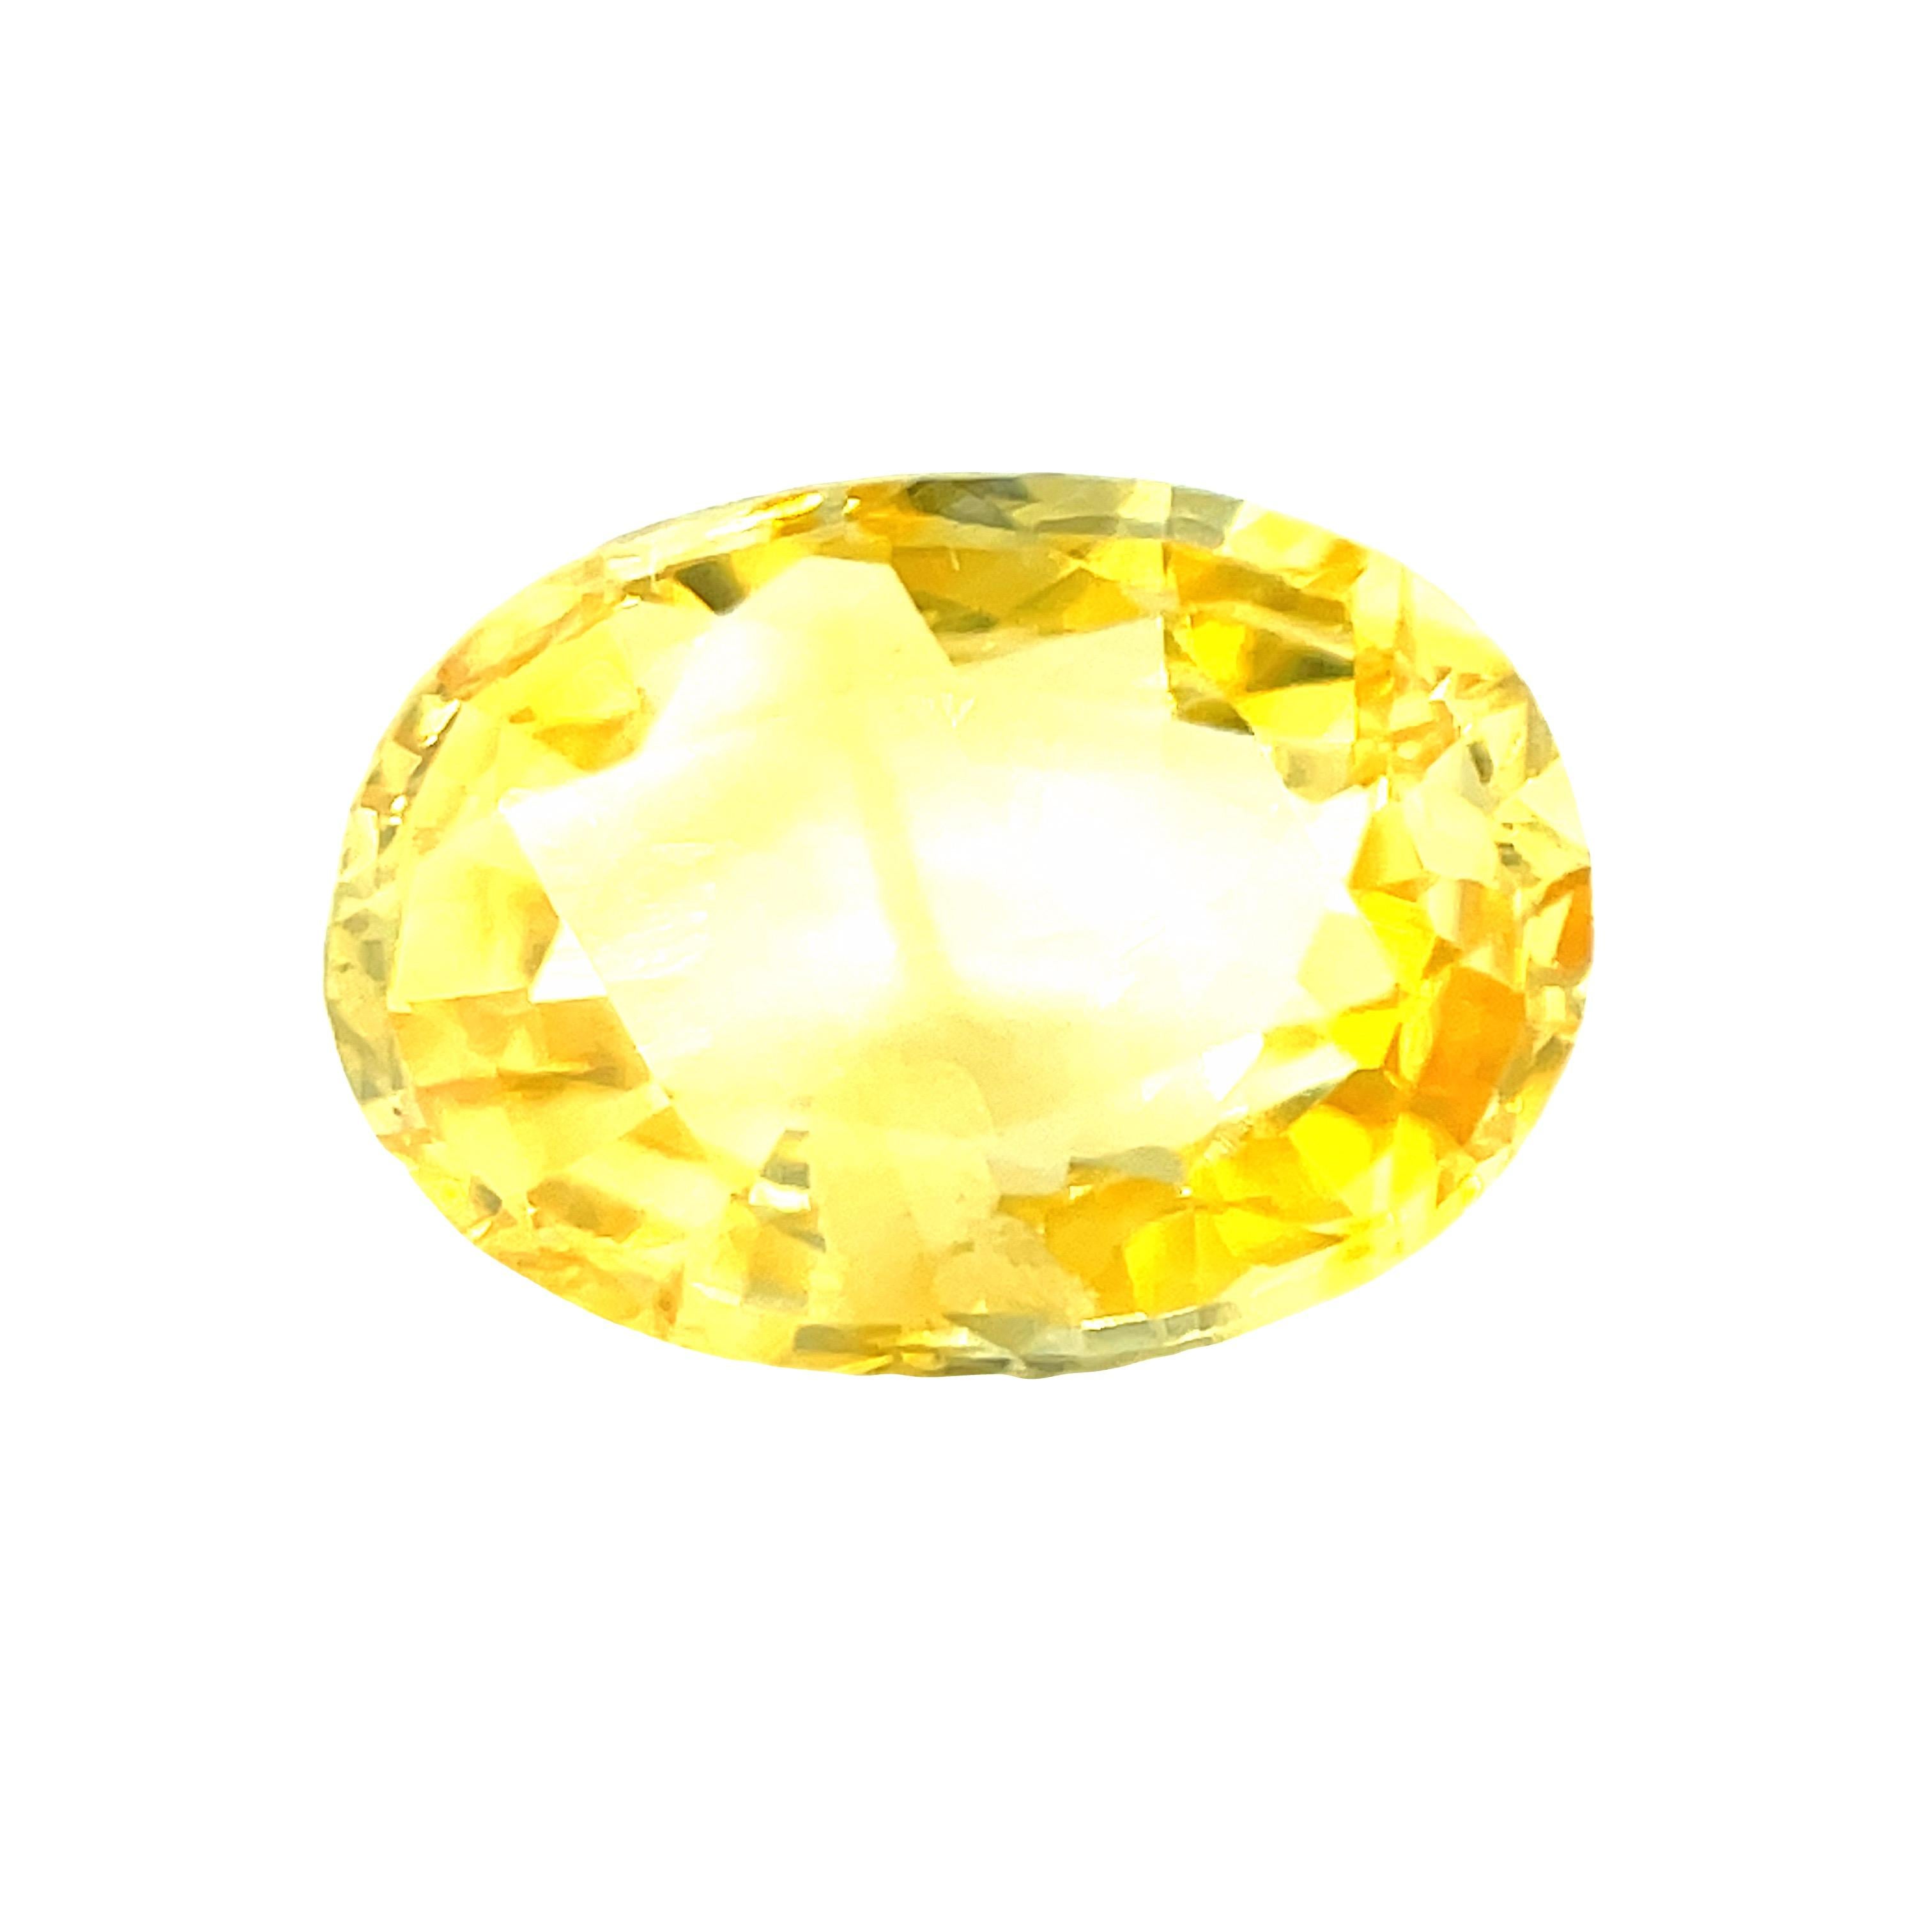 Artisan 3.22 Carat Oval Yellow Sapphire Loose Unset 3-Stone Ring or Pendant Gemstone For Sale